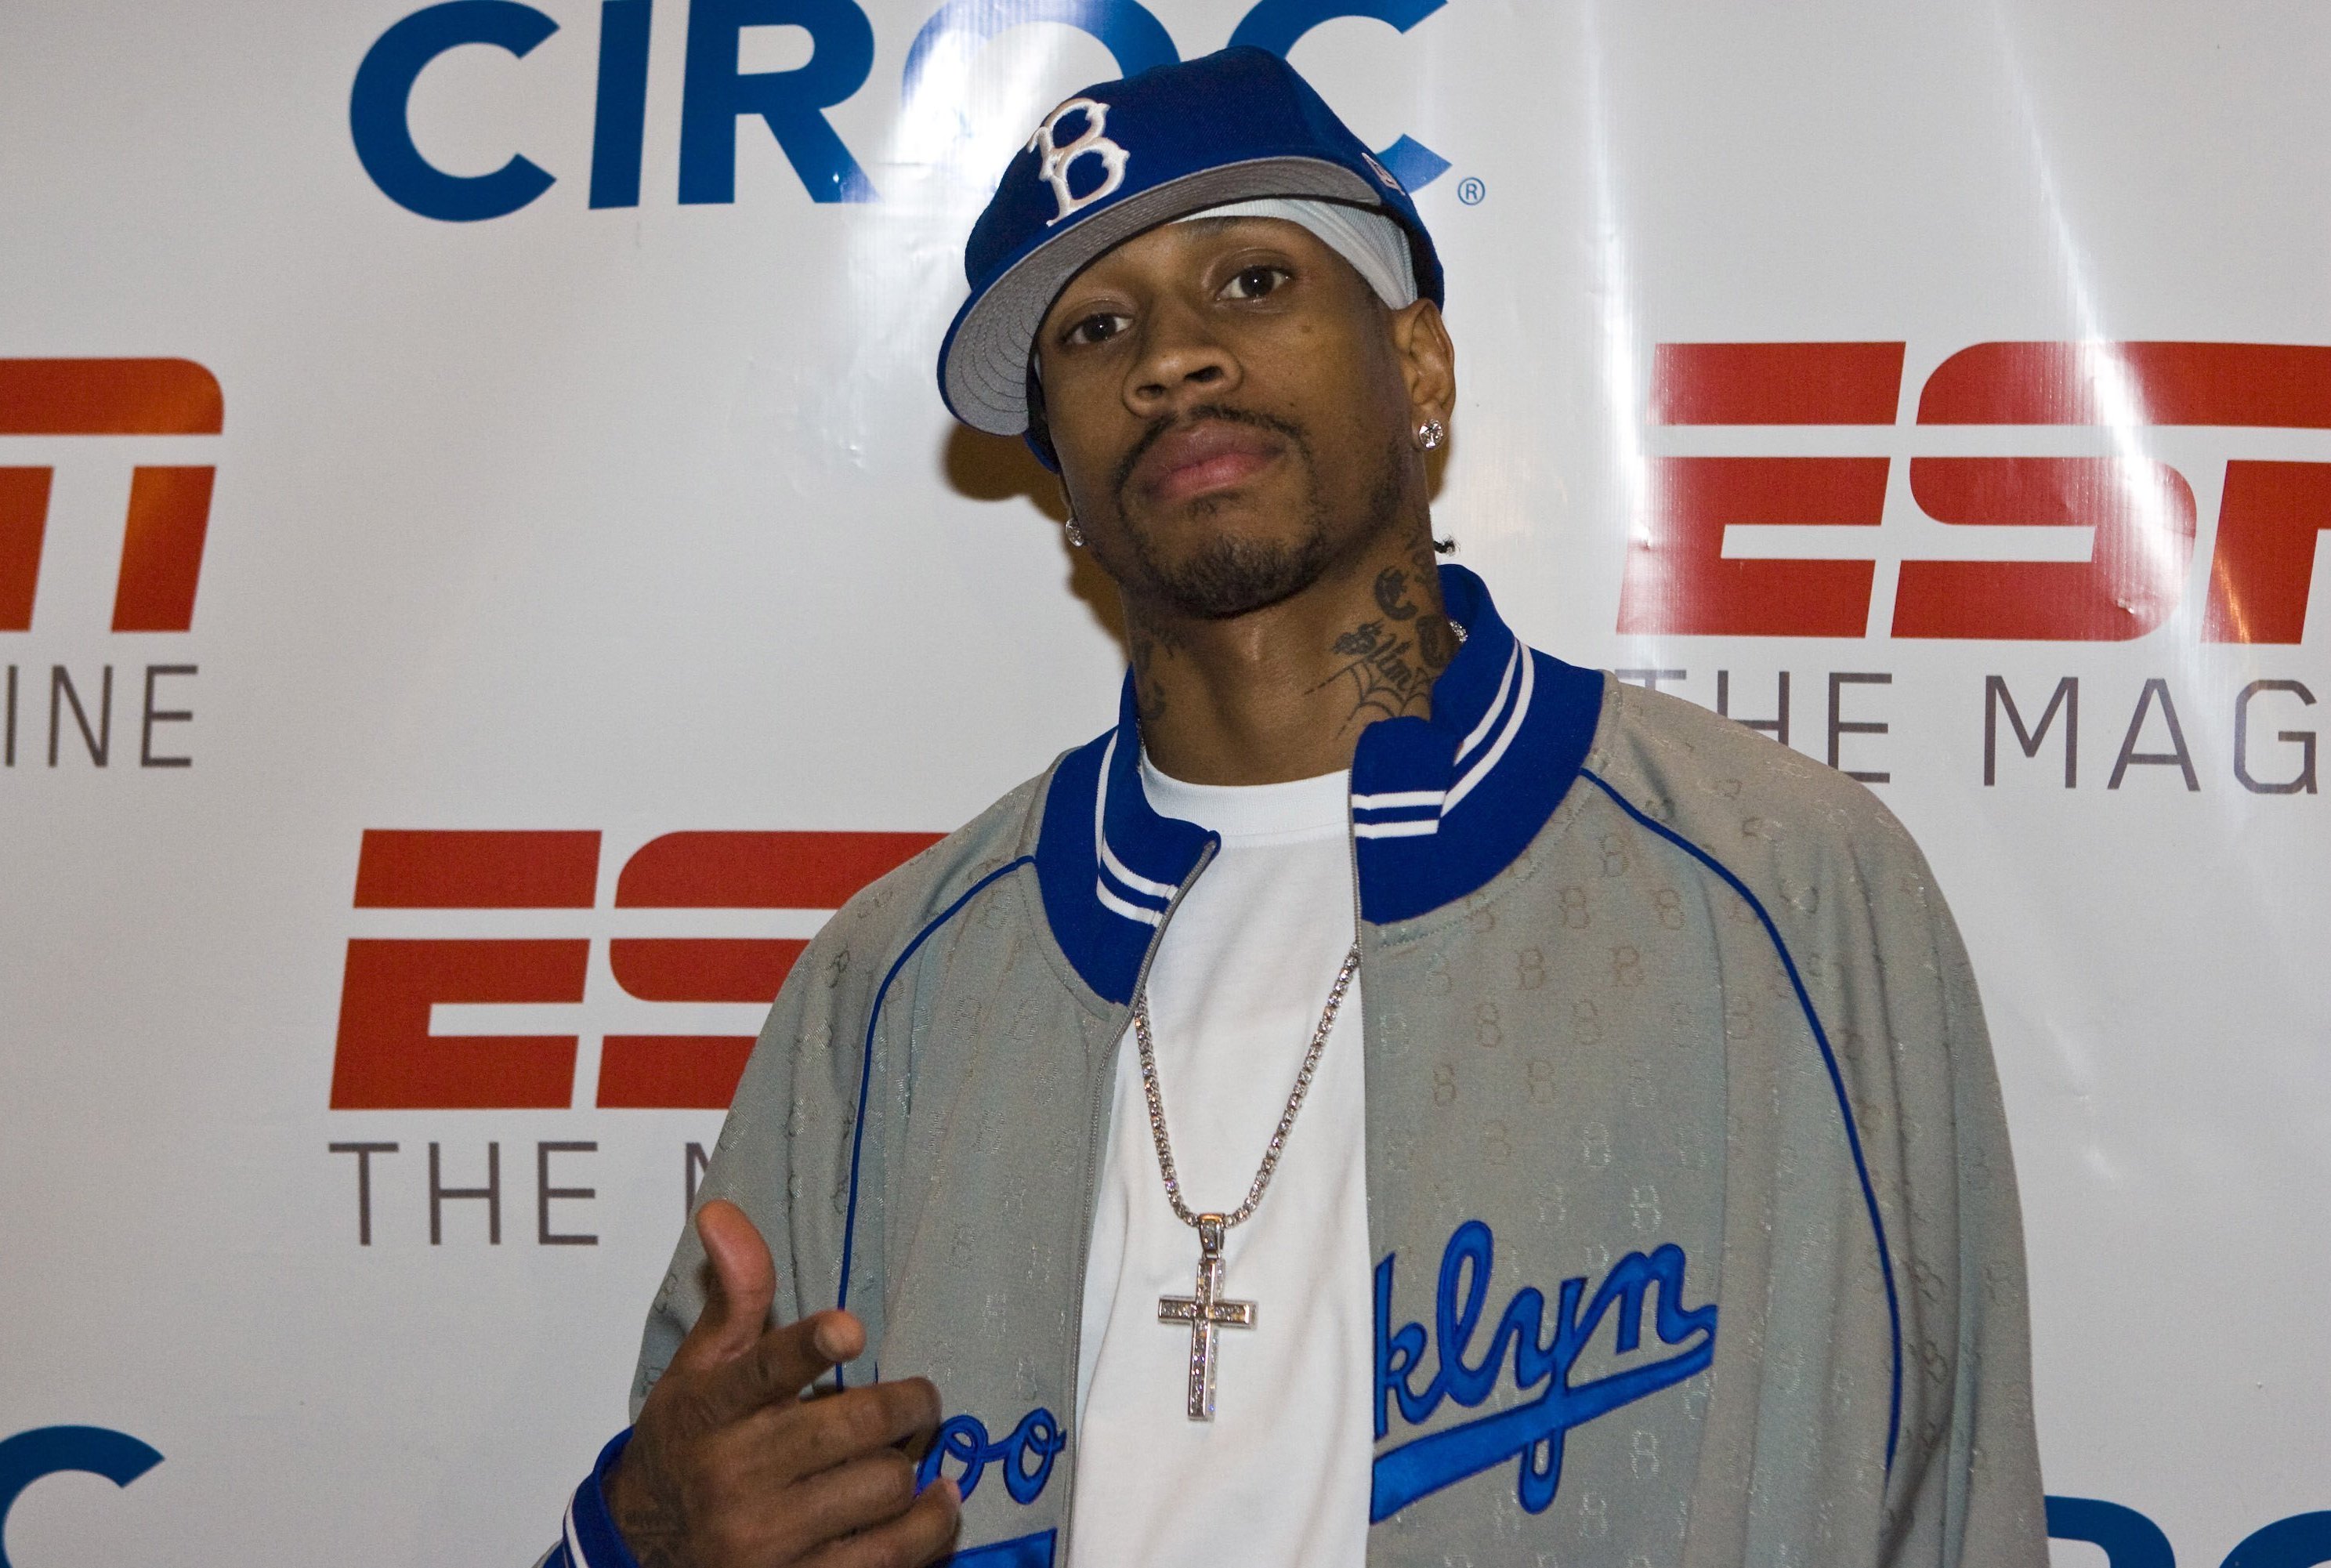 Allen Iverson and the evolution of streetwear